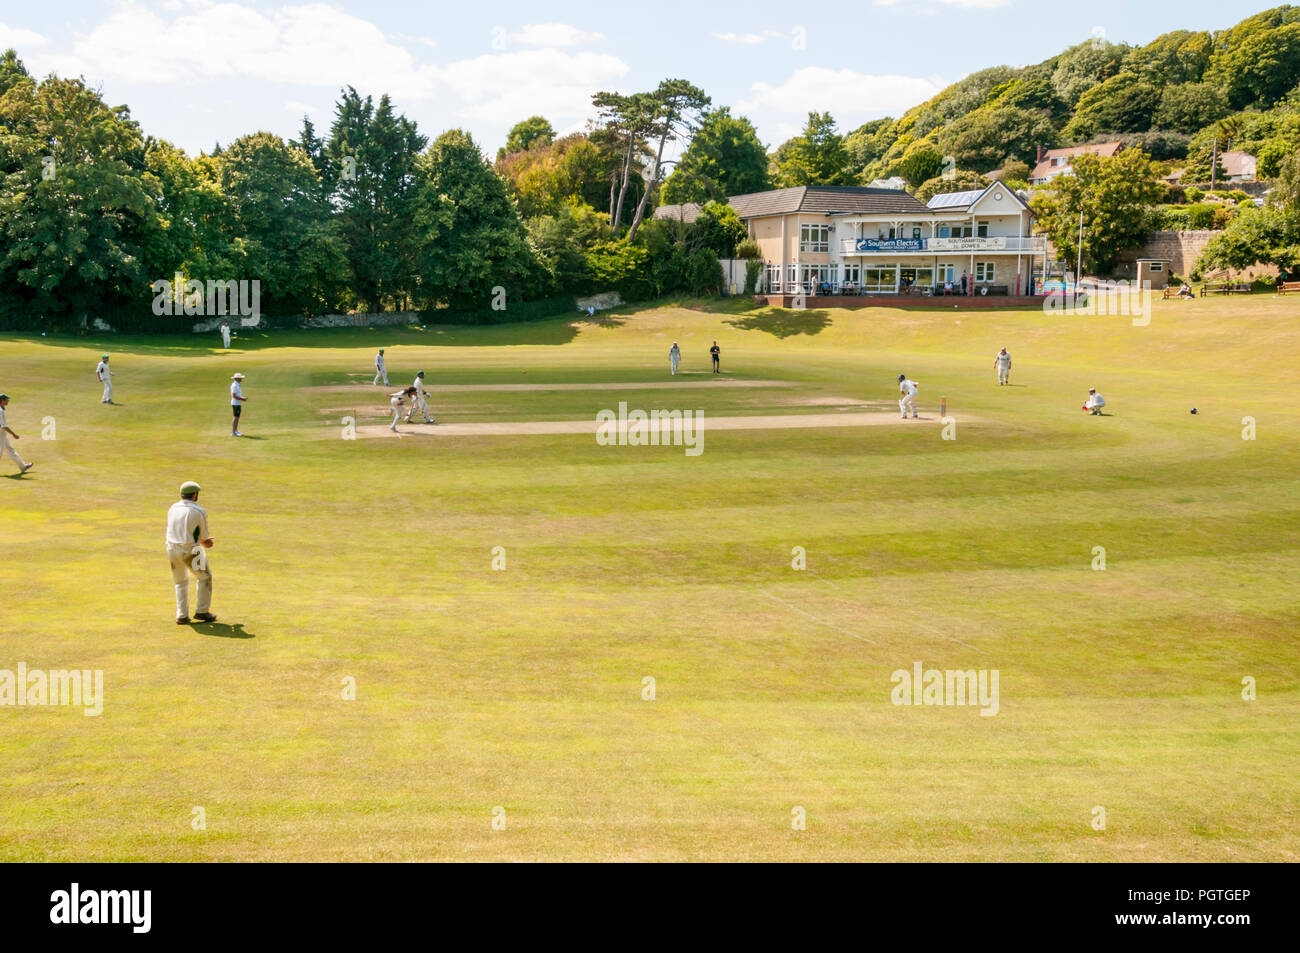 A cricket match in progress at the ground of Ventnor Cricket Club on the Isle of Wight. Stock Photo